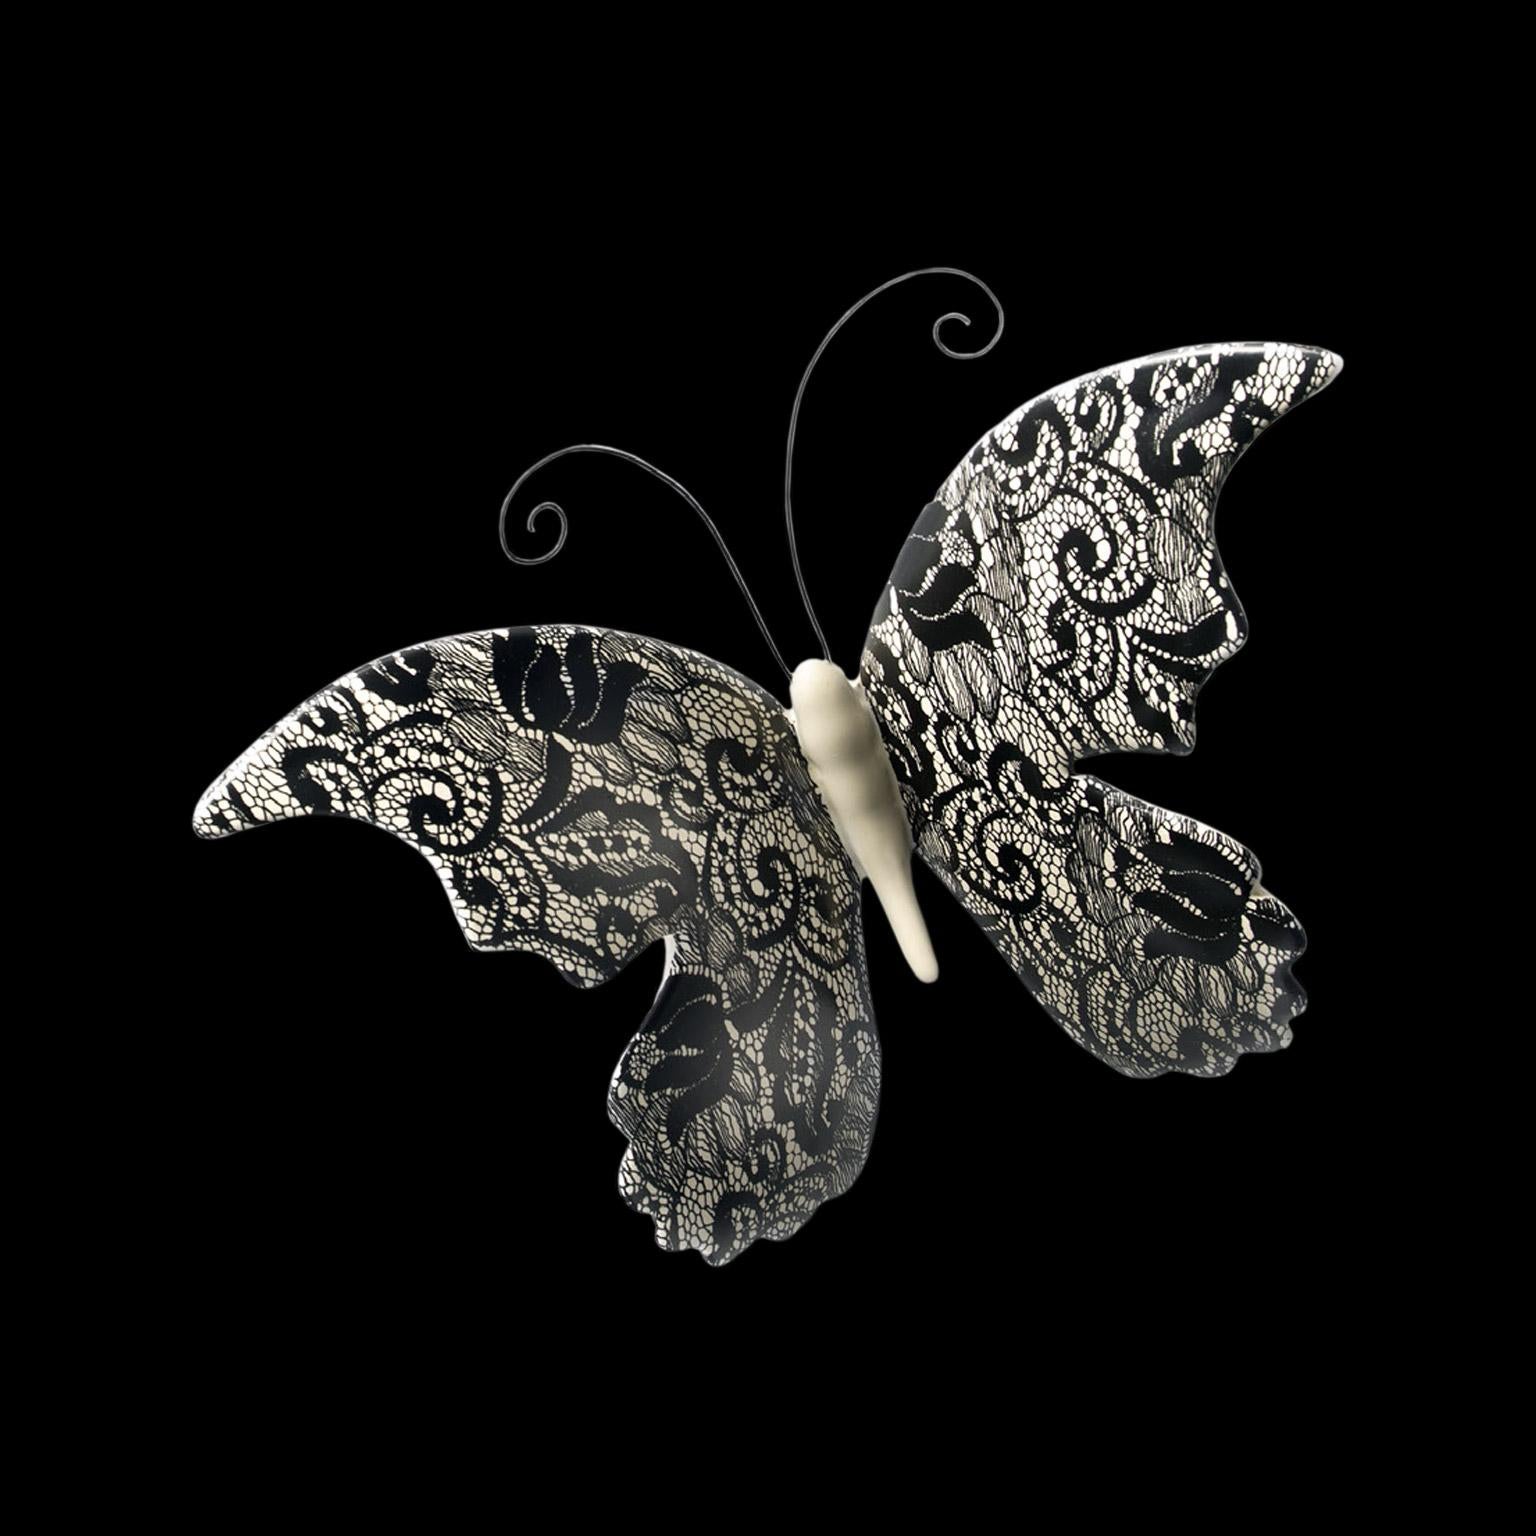 Ceramic BUTTERFLY
cod. BU002
with lace decoration

measures: 40.0 x 30.0 x H 11.0 cm. 